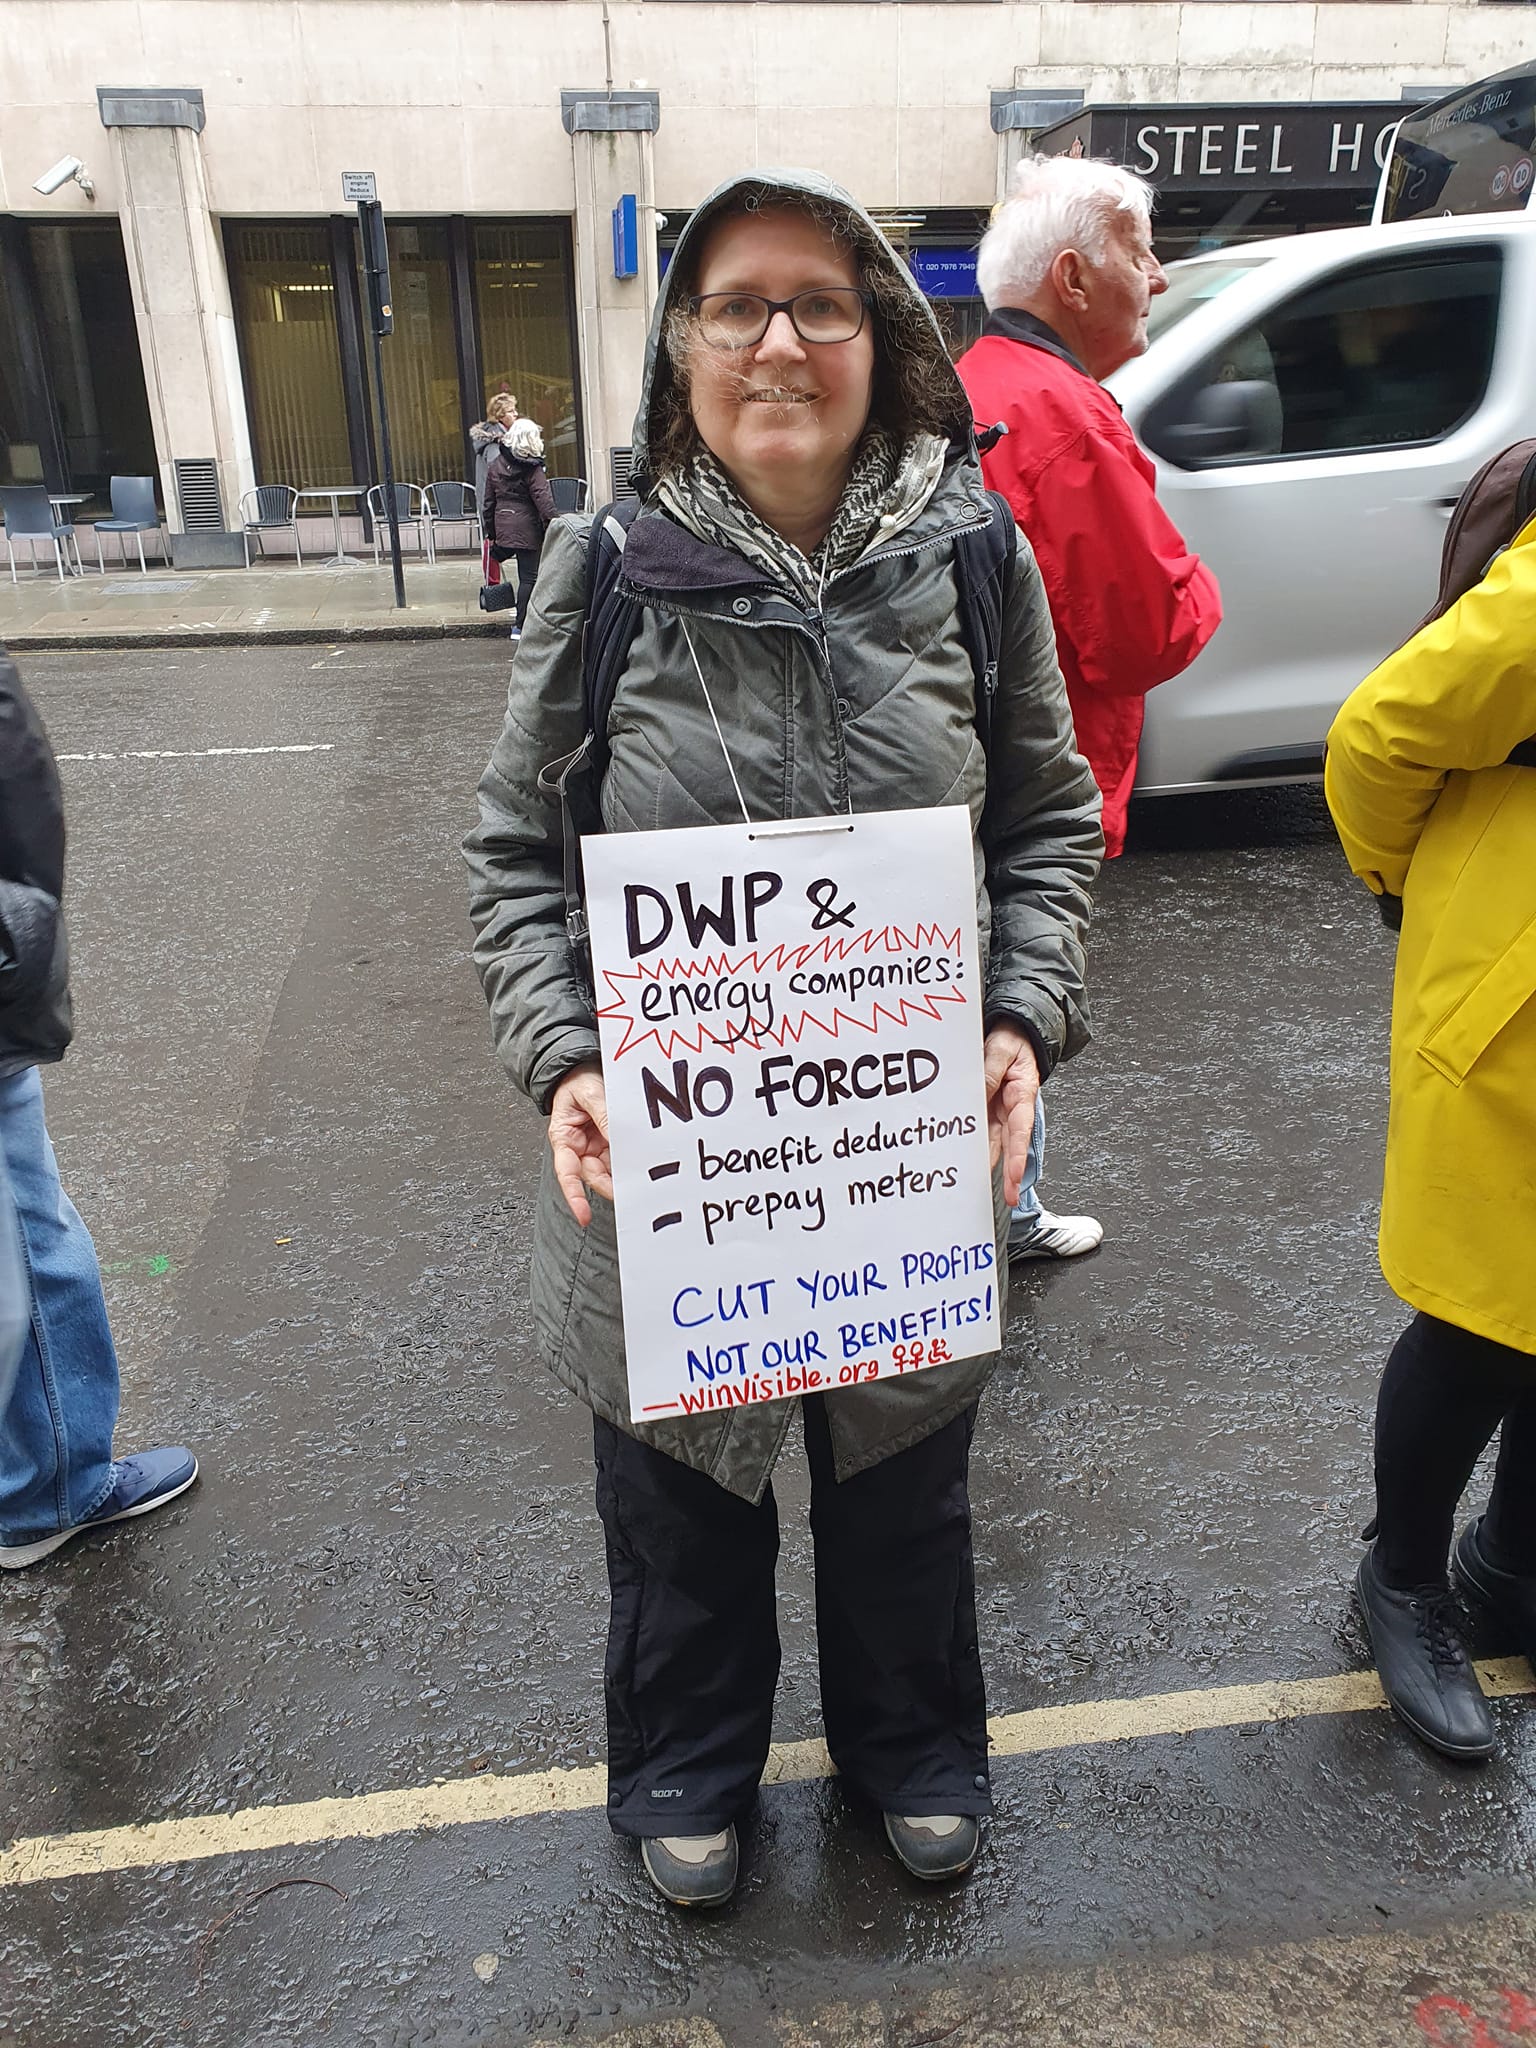 A woman wearing an anorak holds a placard: DWP & energy companies -- No forced benefit deductions/prepay meters.  Cut your profits, not our benefits! winvisible.org